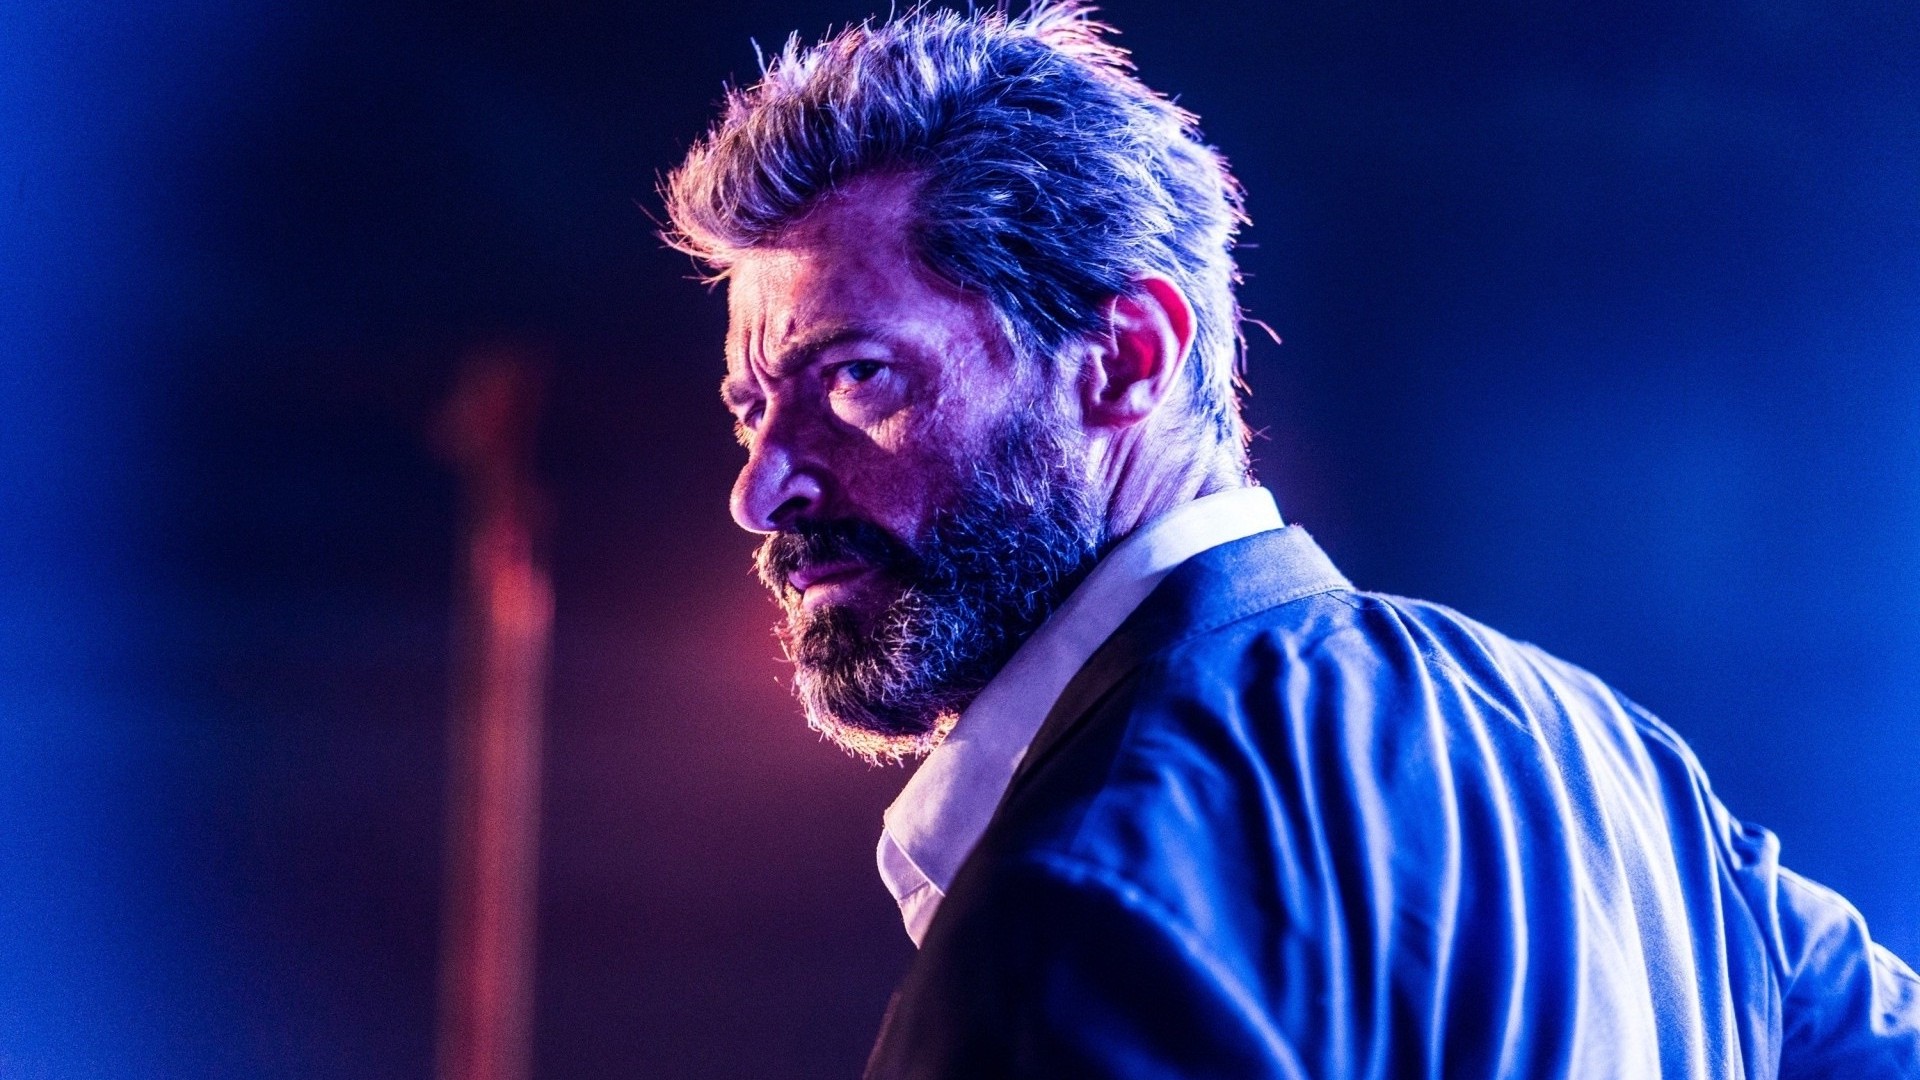 Logan One Last Time HD Superheroes 4k Wallpapers Images Backgrounds  Photos and Pictures